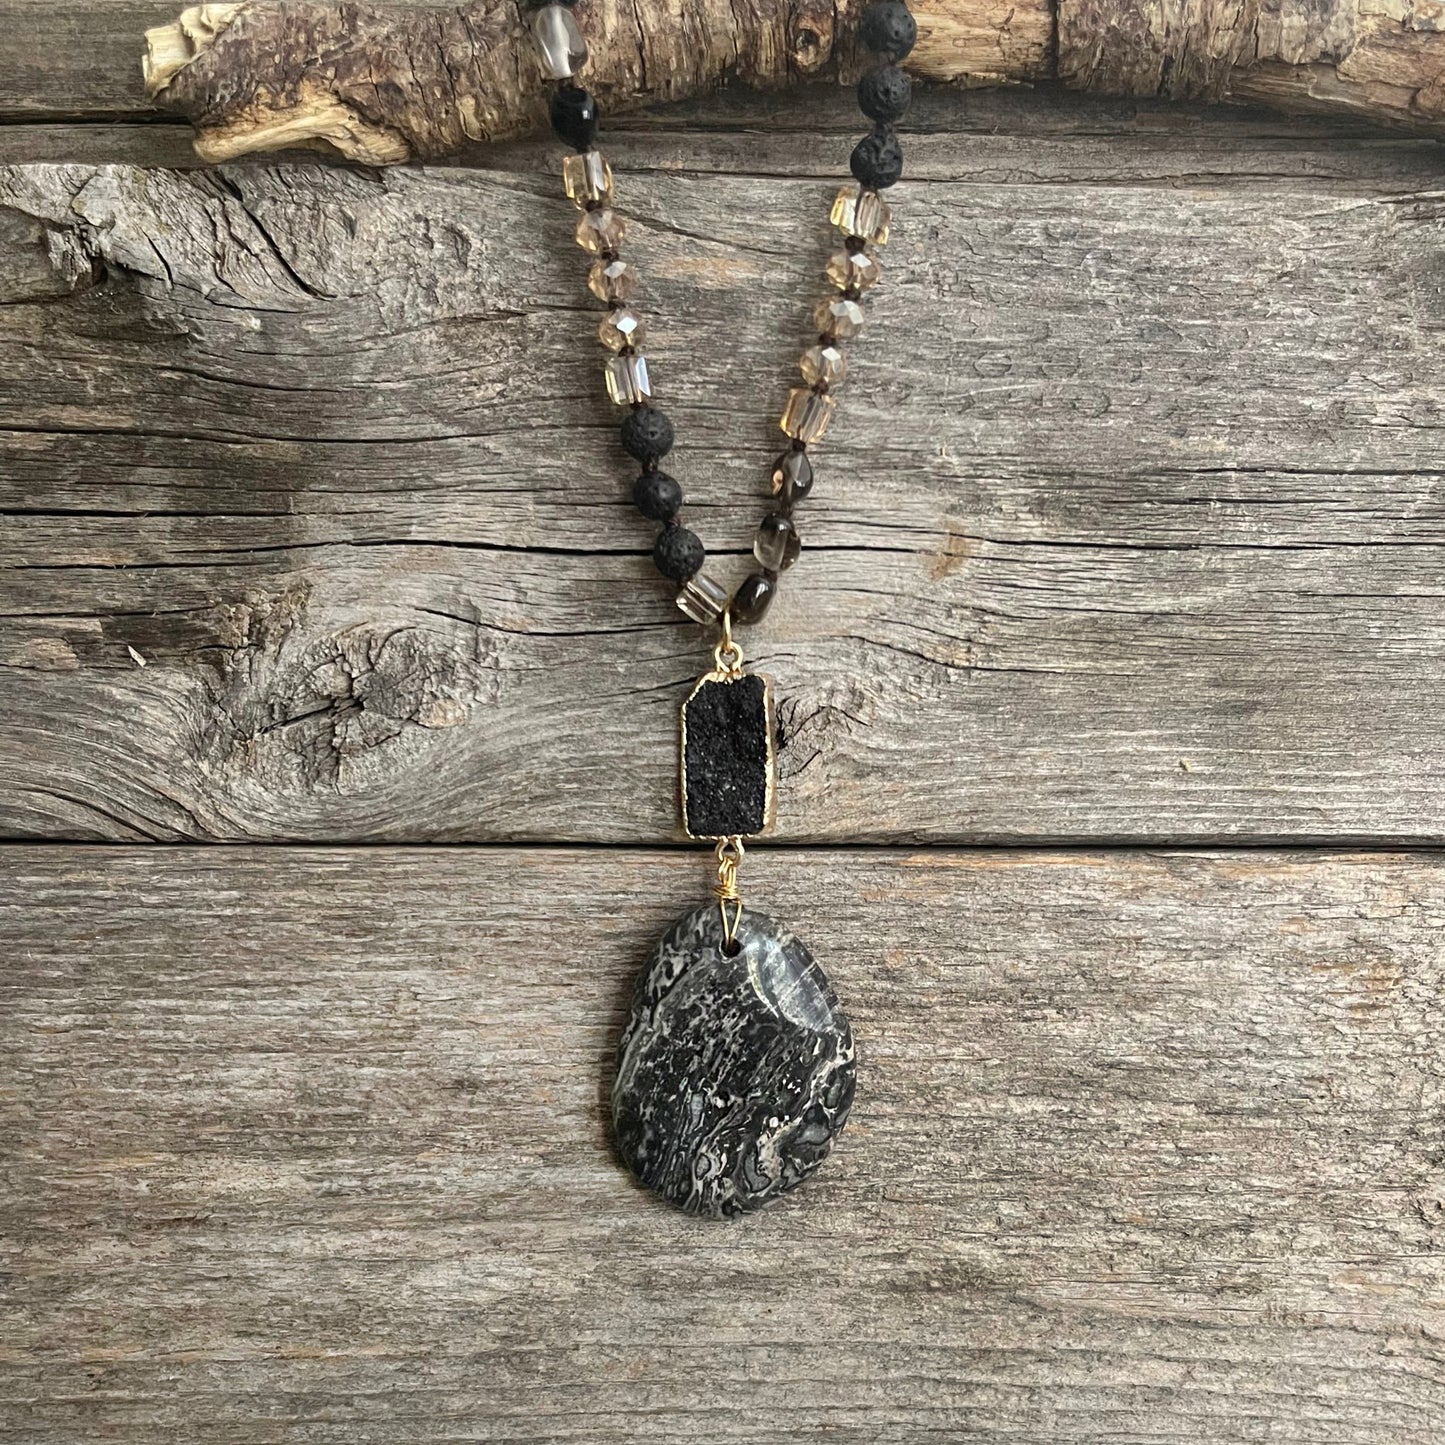 Handmade Natural Stone Bead Necklace with Drop Pendant